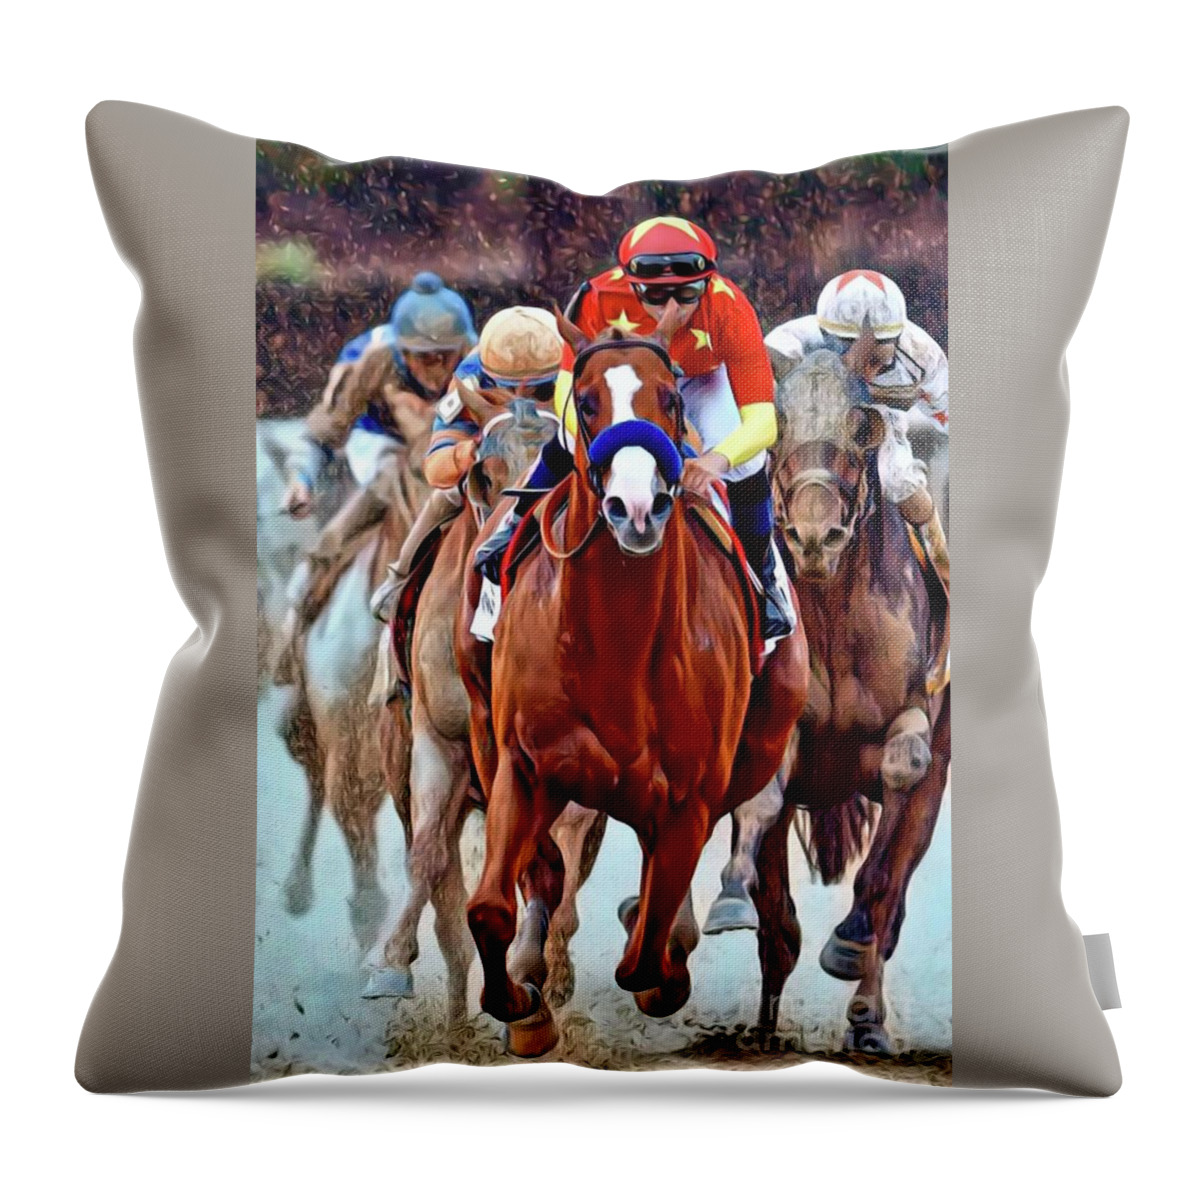 Justify Throw Pillow featuring the digital art Triple Crown Winner Justify by CAC Graphics